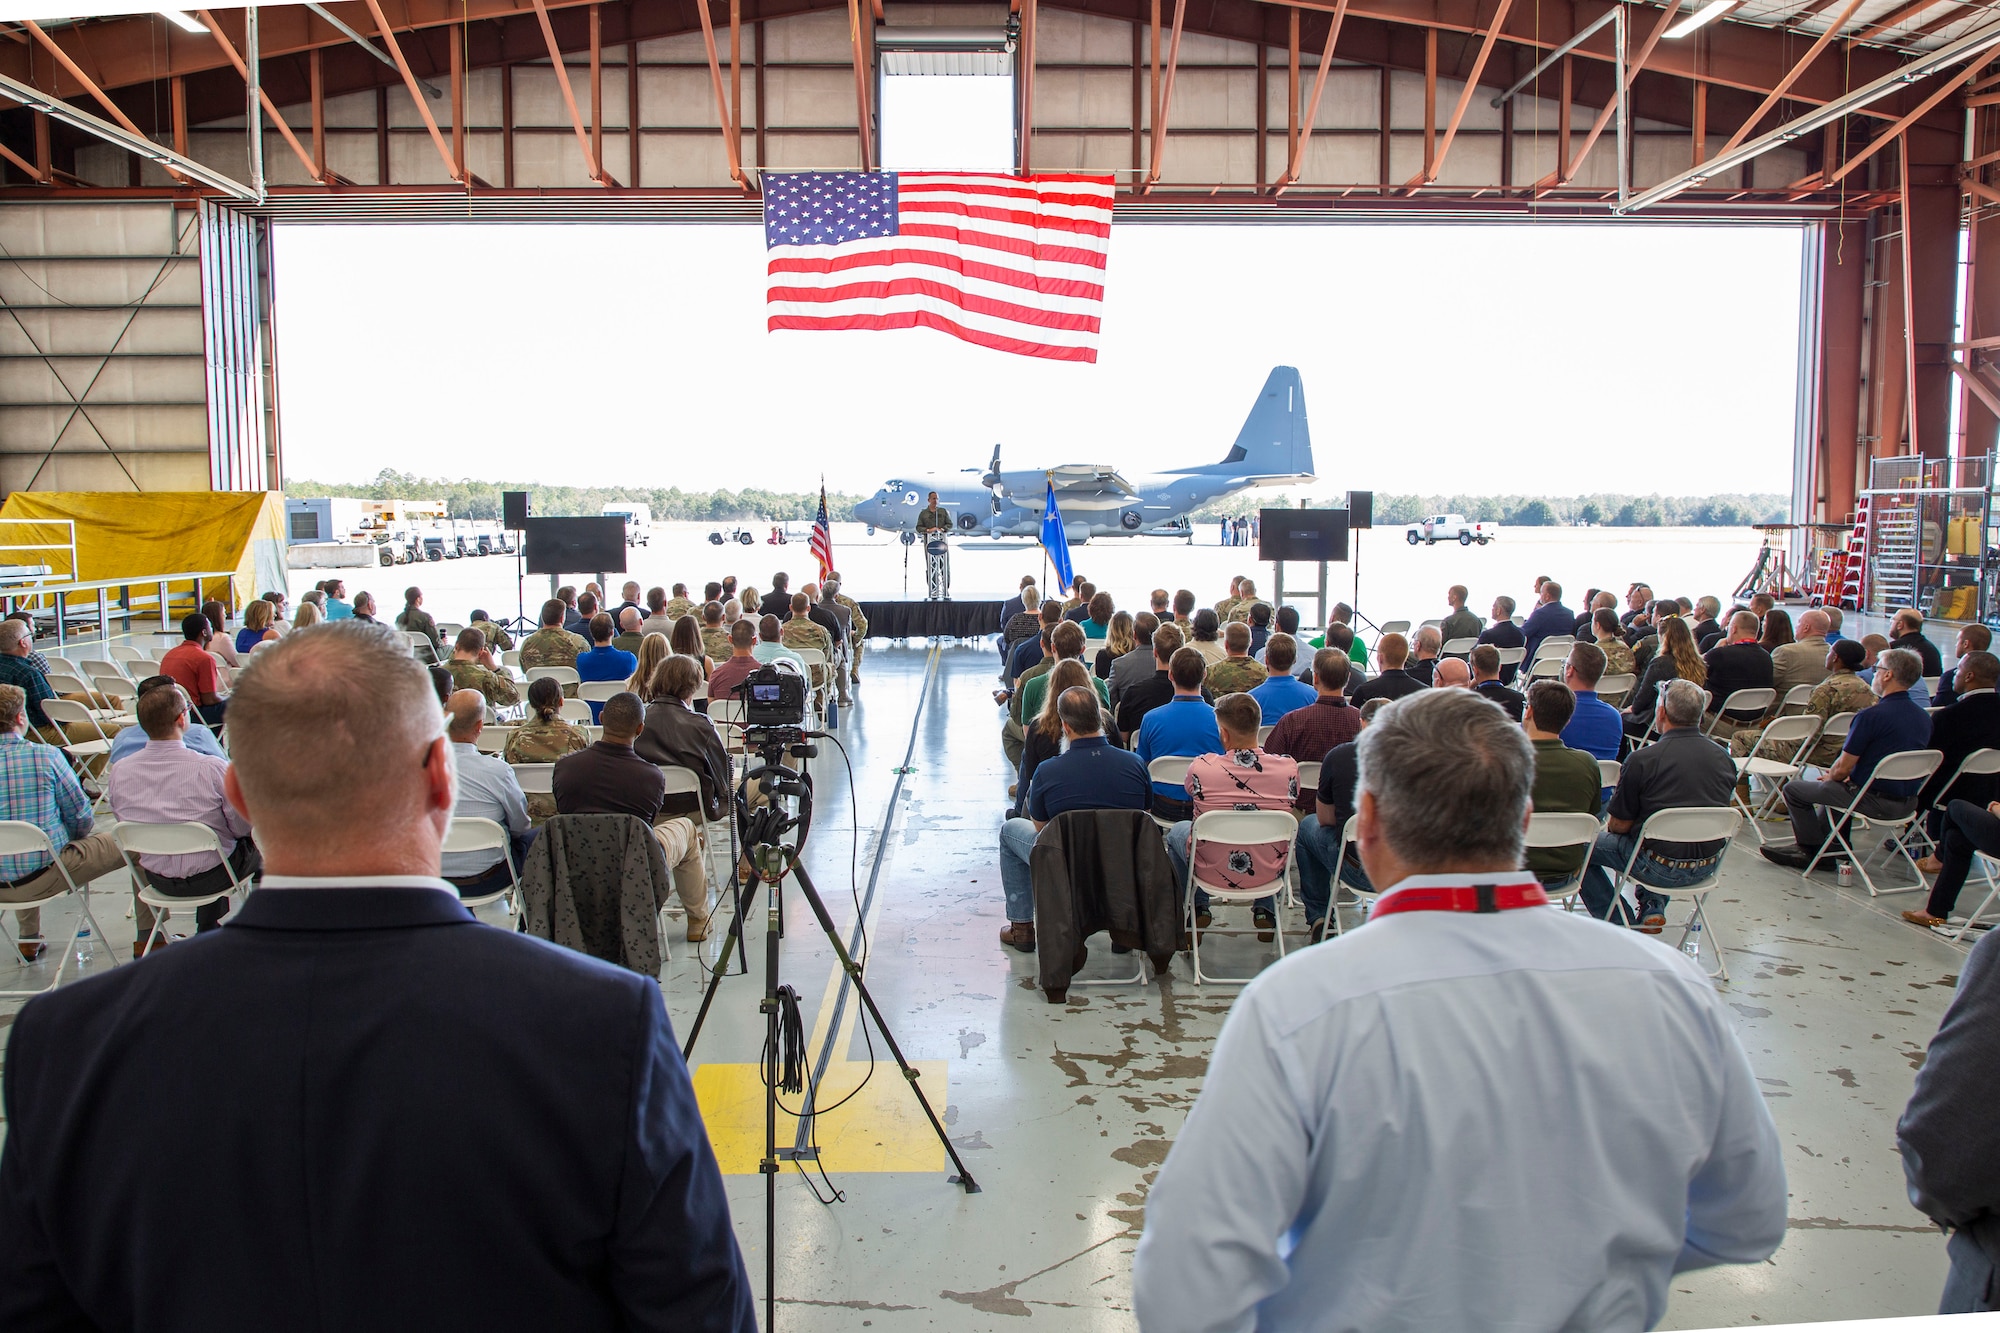 Attendees listen to remarks during the AC130J Ghostrider Dedication and Delivery Ceremony November 2nd 2022, at Bob Sikes Airport in Crestview, Florida. The aircraft, which was the final one delivered of the 31 purchased by the US Air Force, was nicknamed after Sluggo because of his instrumental work in the development of the aircraft’s precision strike package.